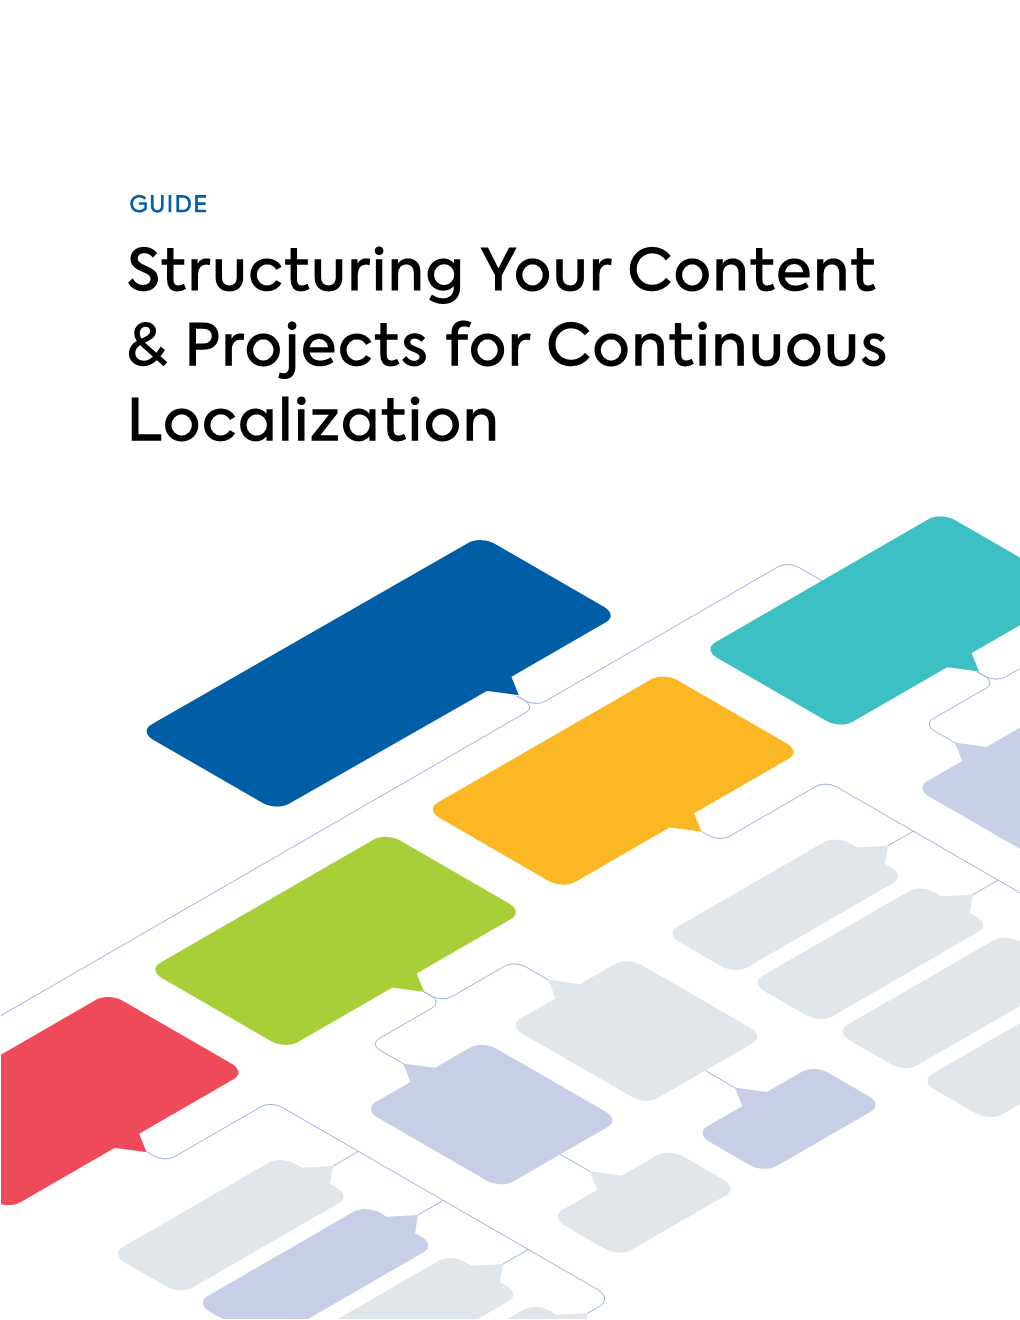 Structuring Your Content & Projects for Continuous Localization